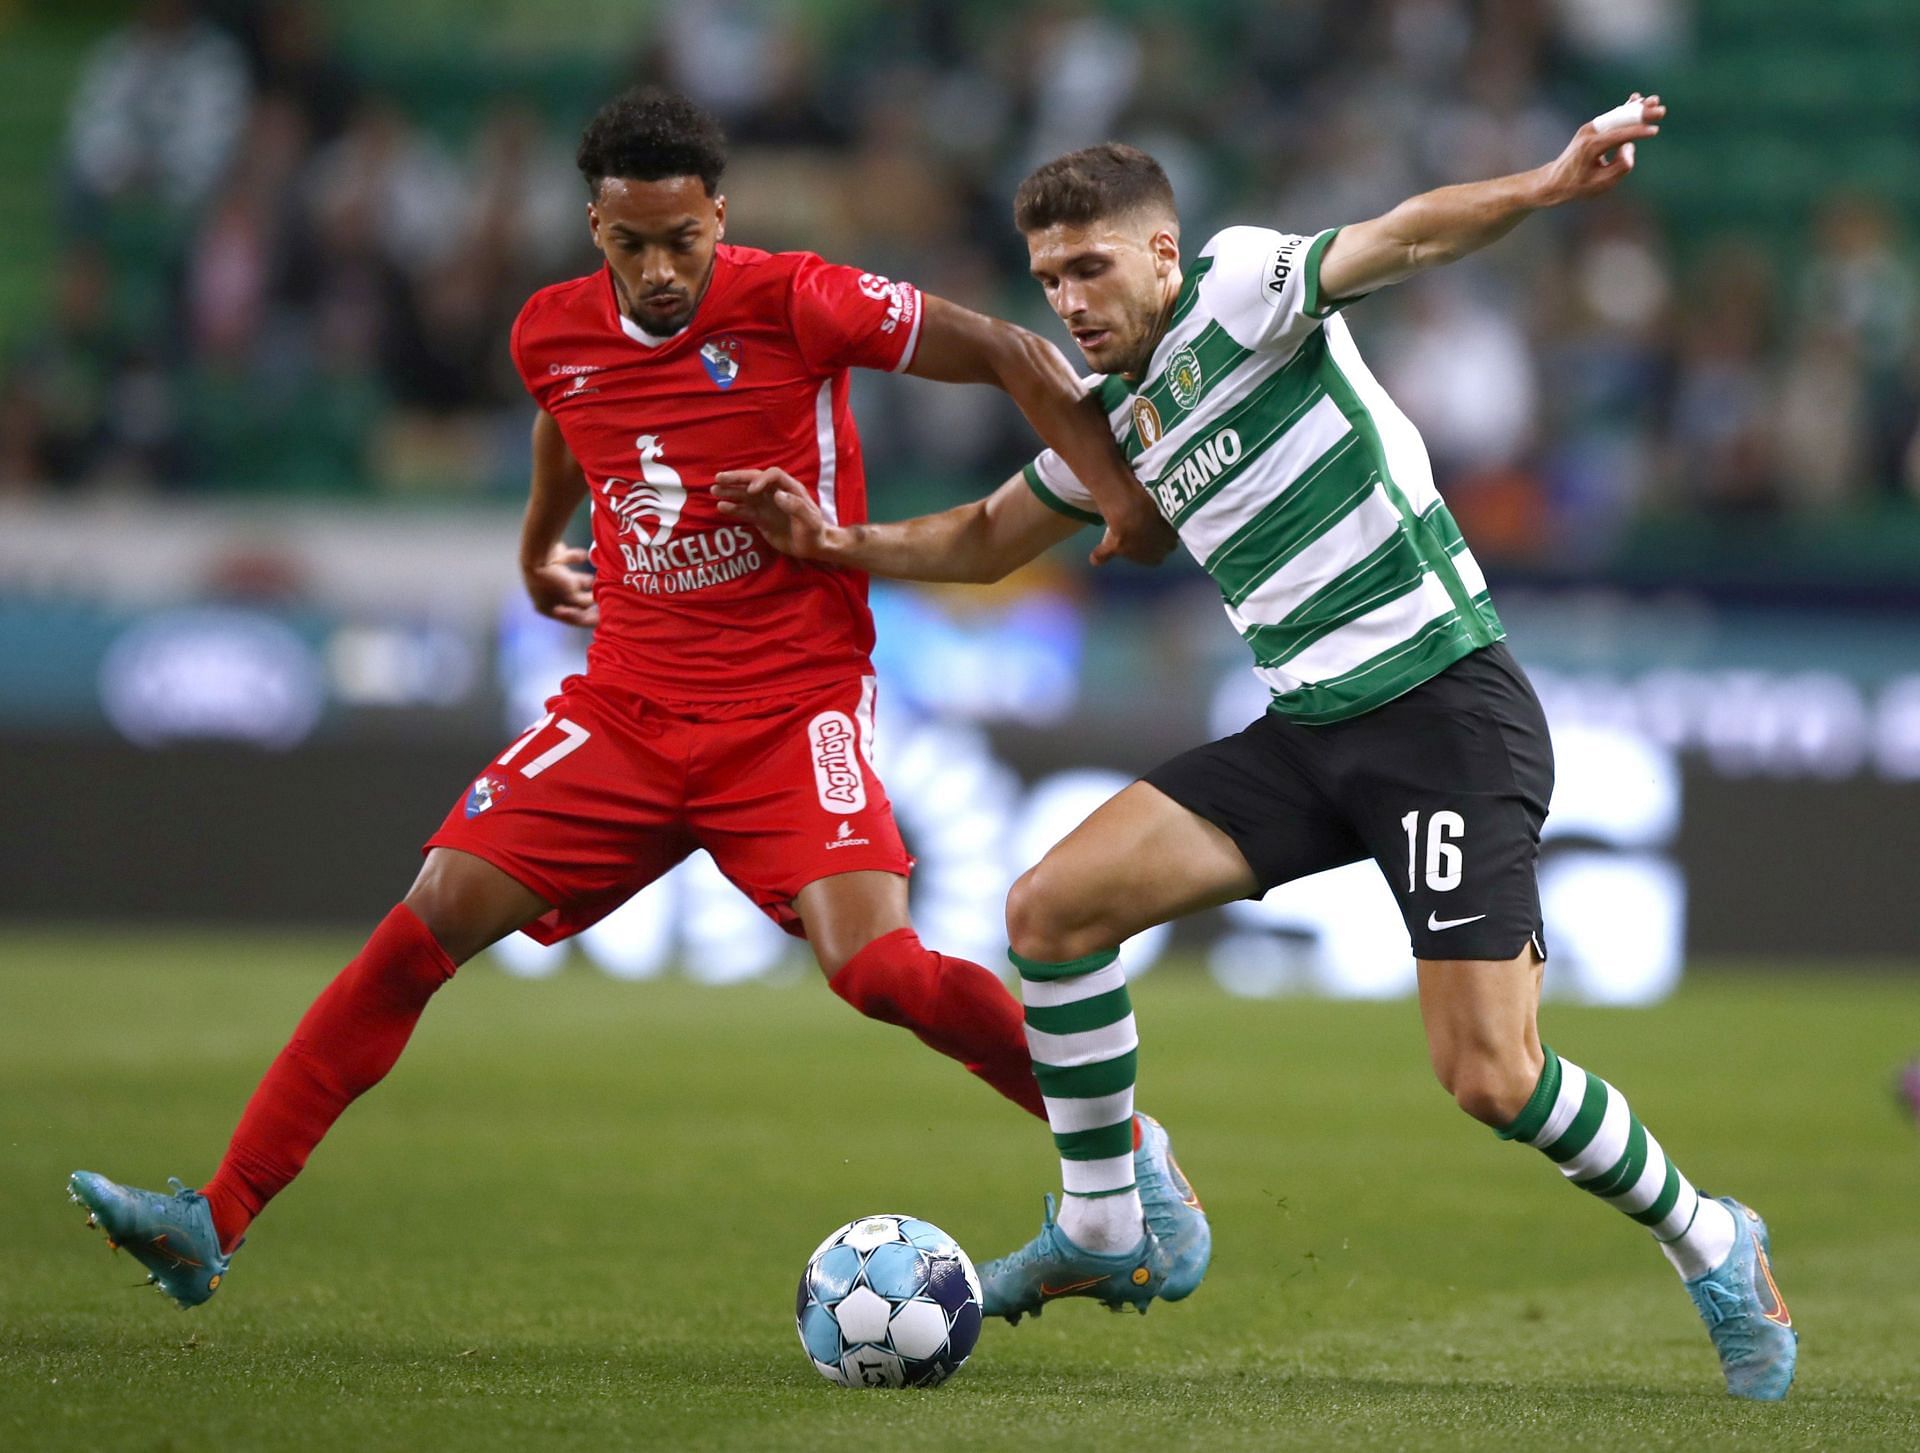 Sporting and Gil Vicente meet in Portuguese Primeira Liga on Friday